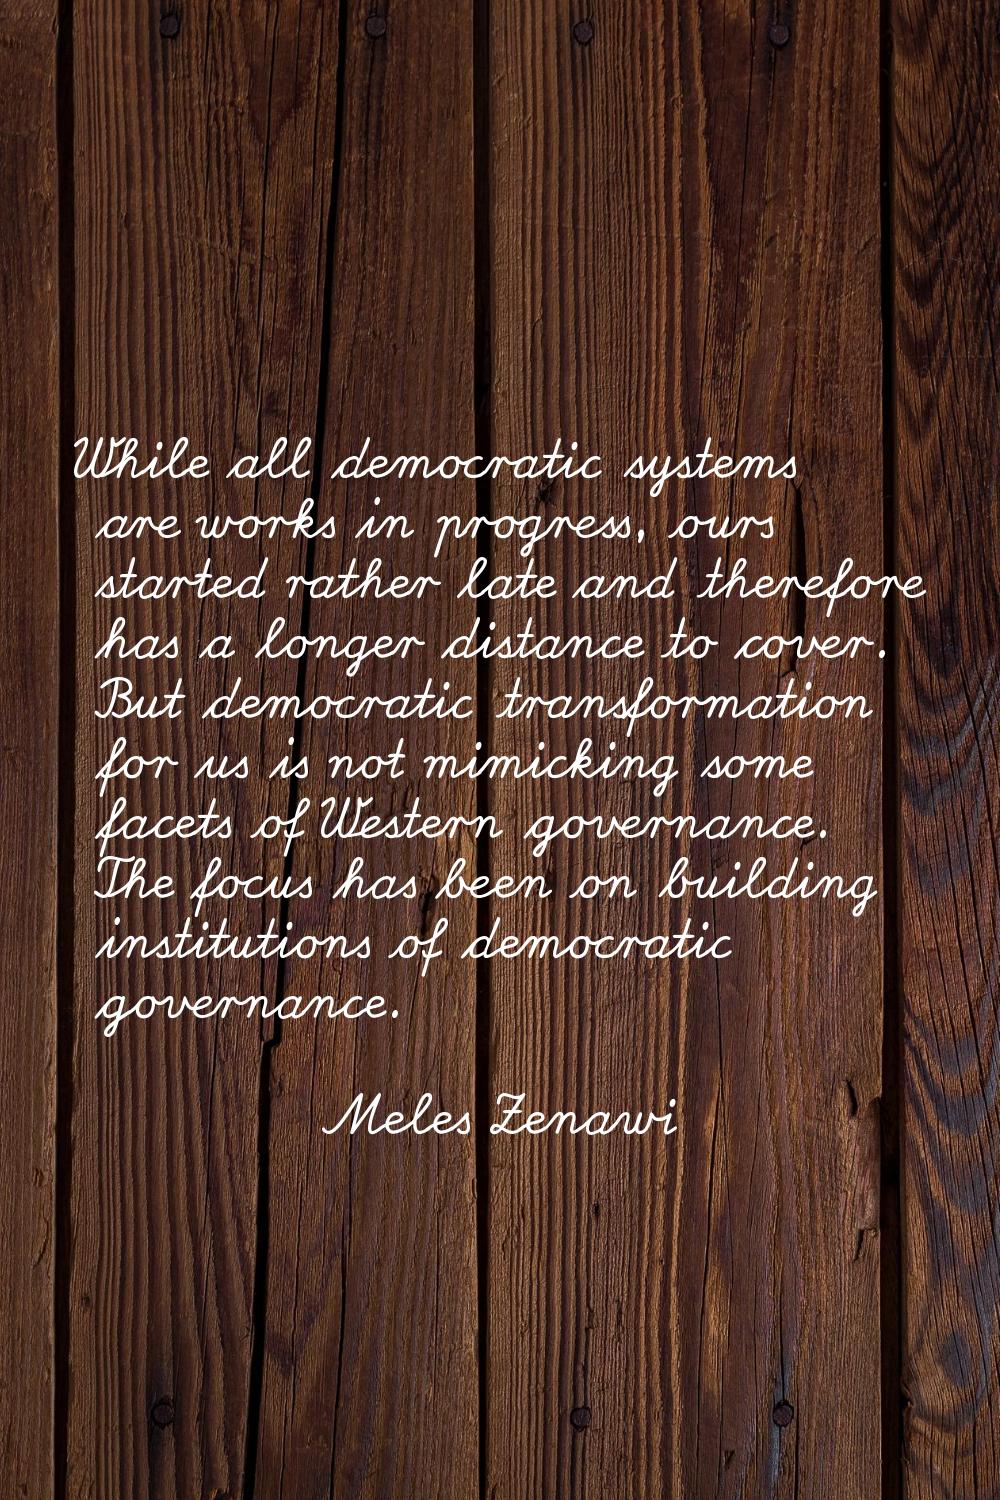 While all democratic systems are works in progress, ours started rather late and therefore has a lo